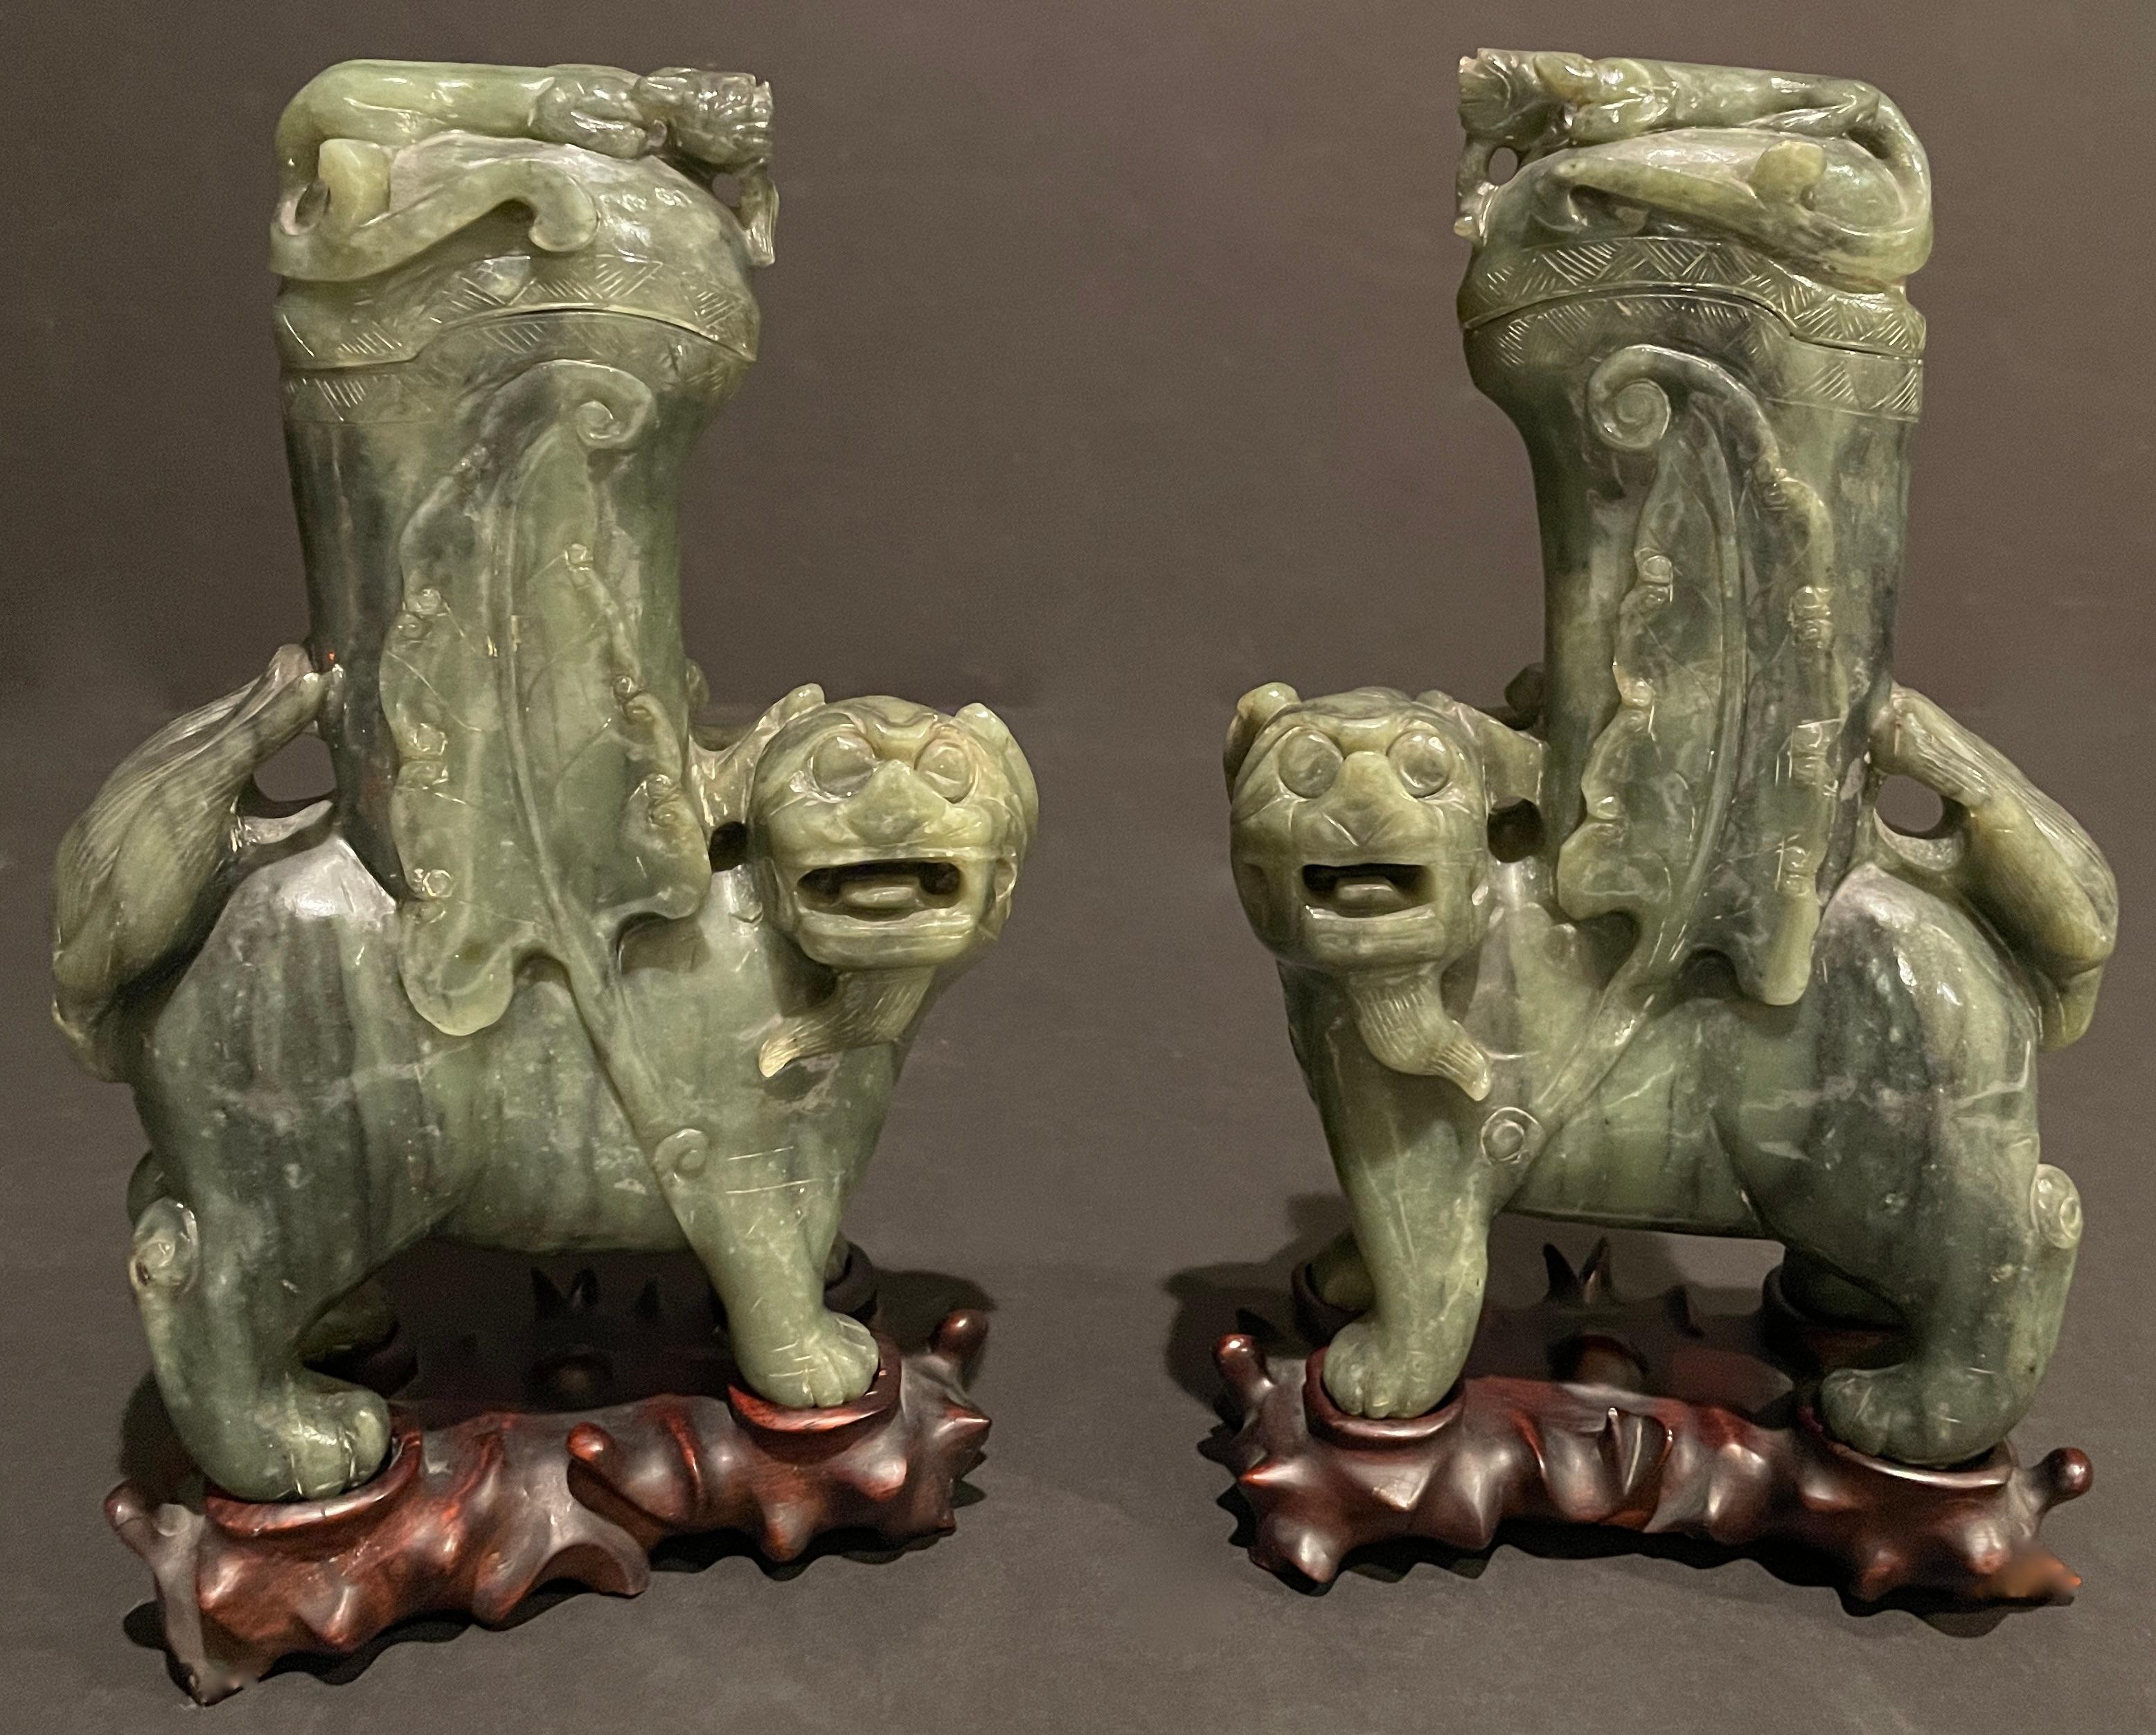 Pair of hand carved Chinese Jade hardstone Foo Lions or Fu Dogs. This pair of Chinese spinach jade appears to be a nephrite, covered vases having a figural foo lion design with raised Phoenix tail feather designs. I believe it's made in the 19th